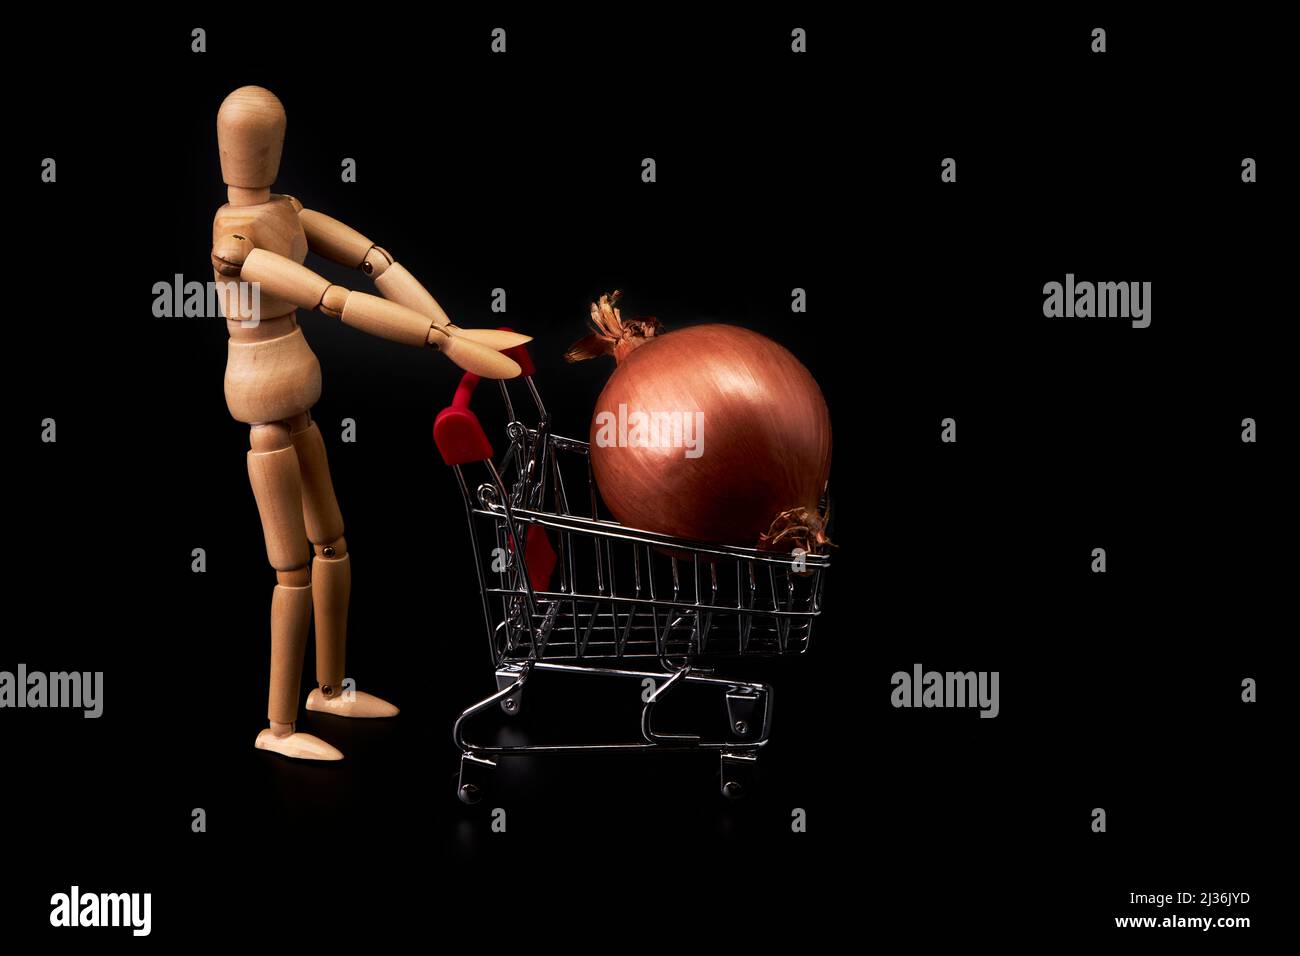 Dummy pushing a shopping cart with an onion on black background. Trade symbol. Healthy shopping Stock Photo